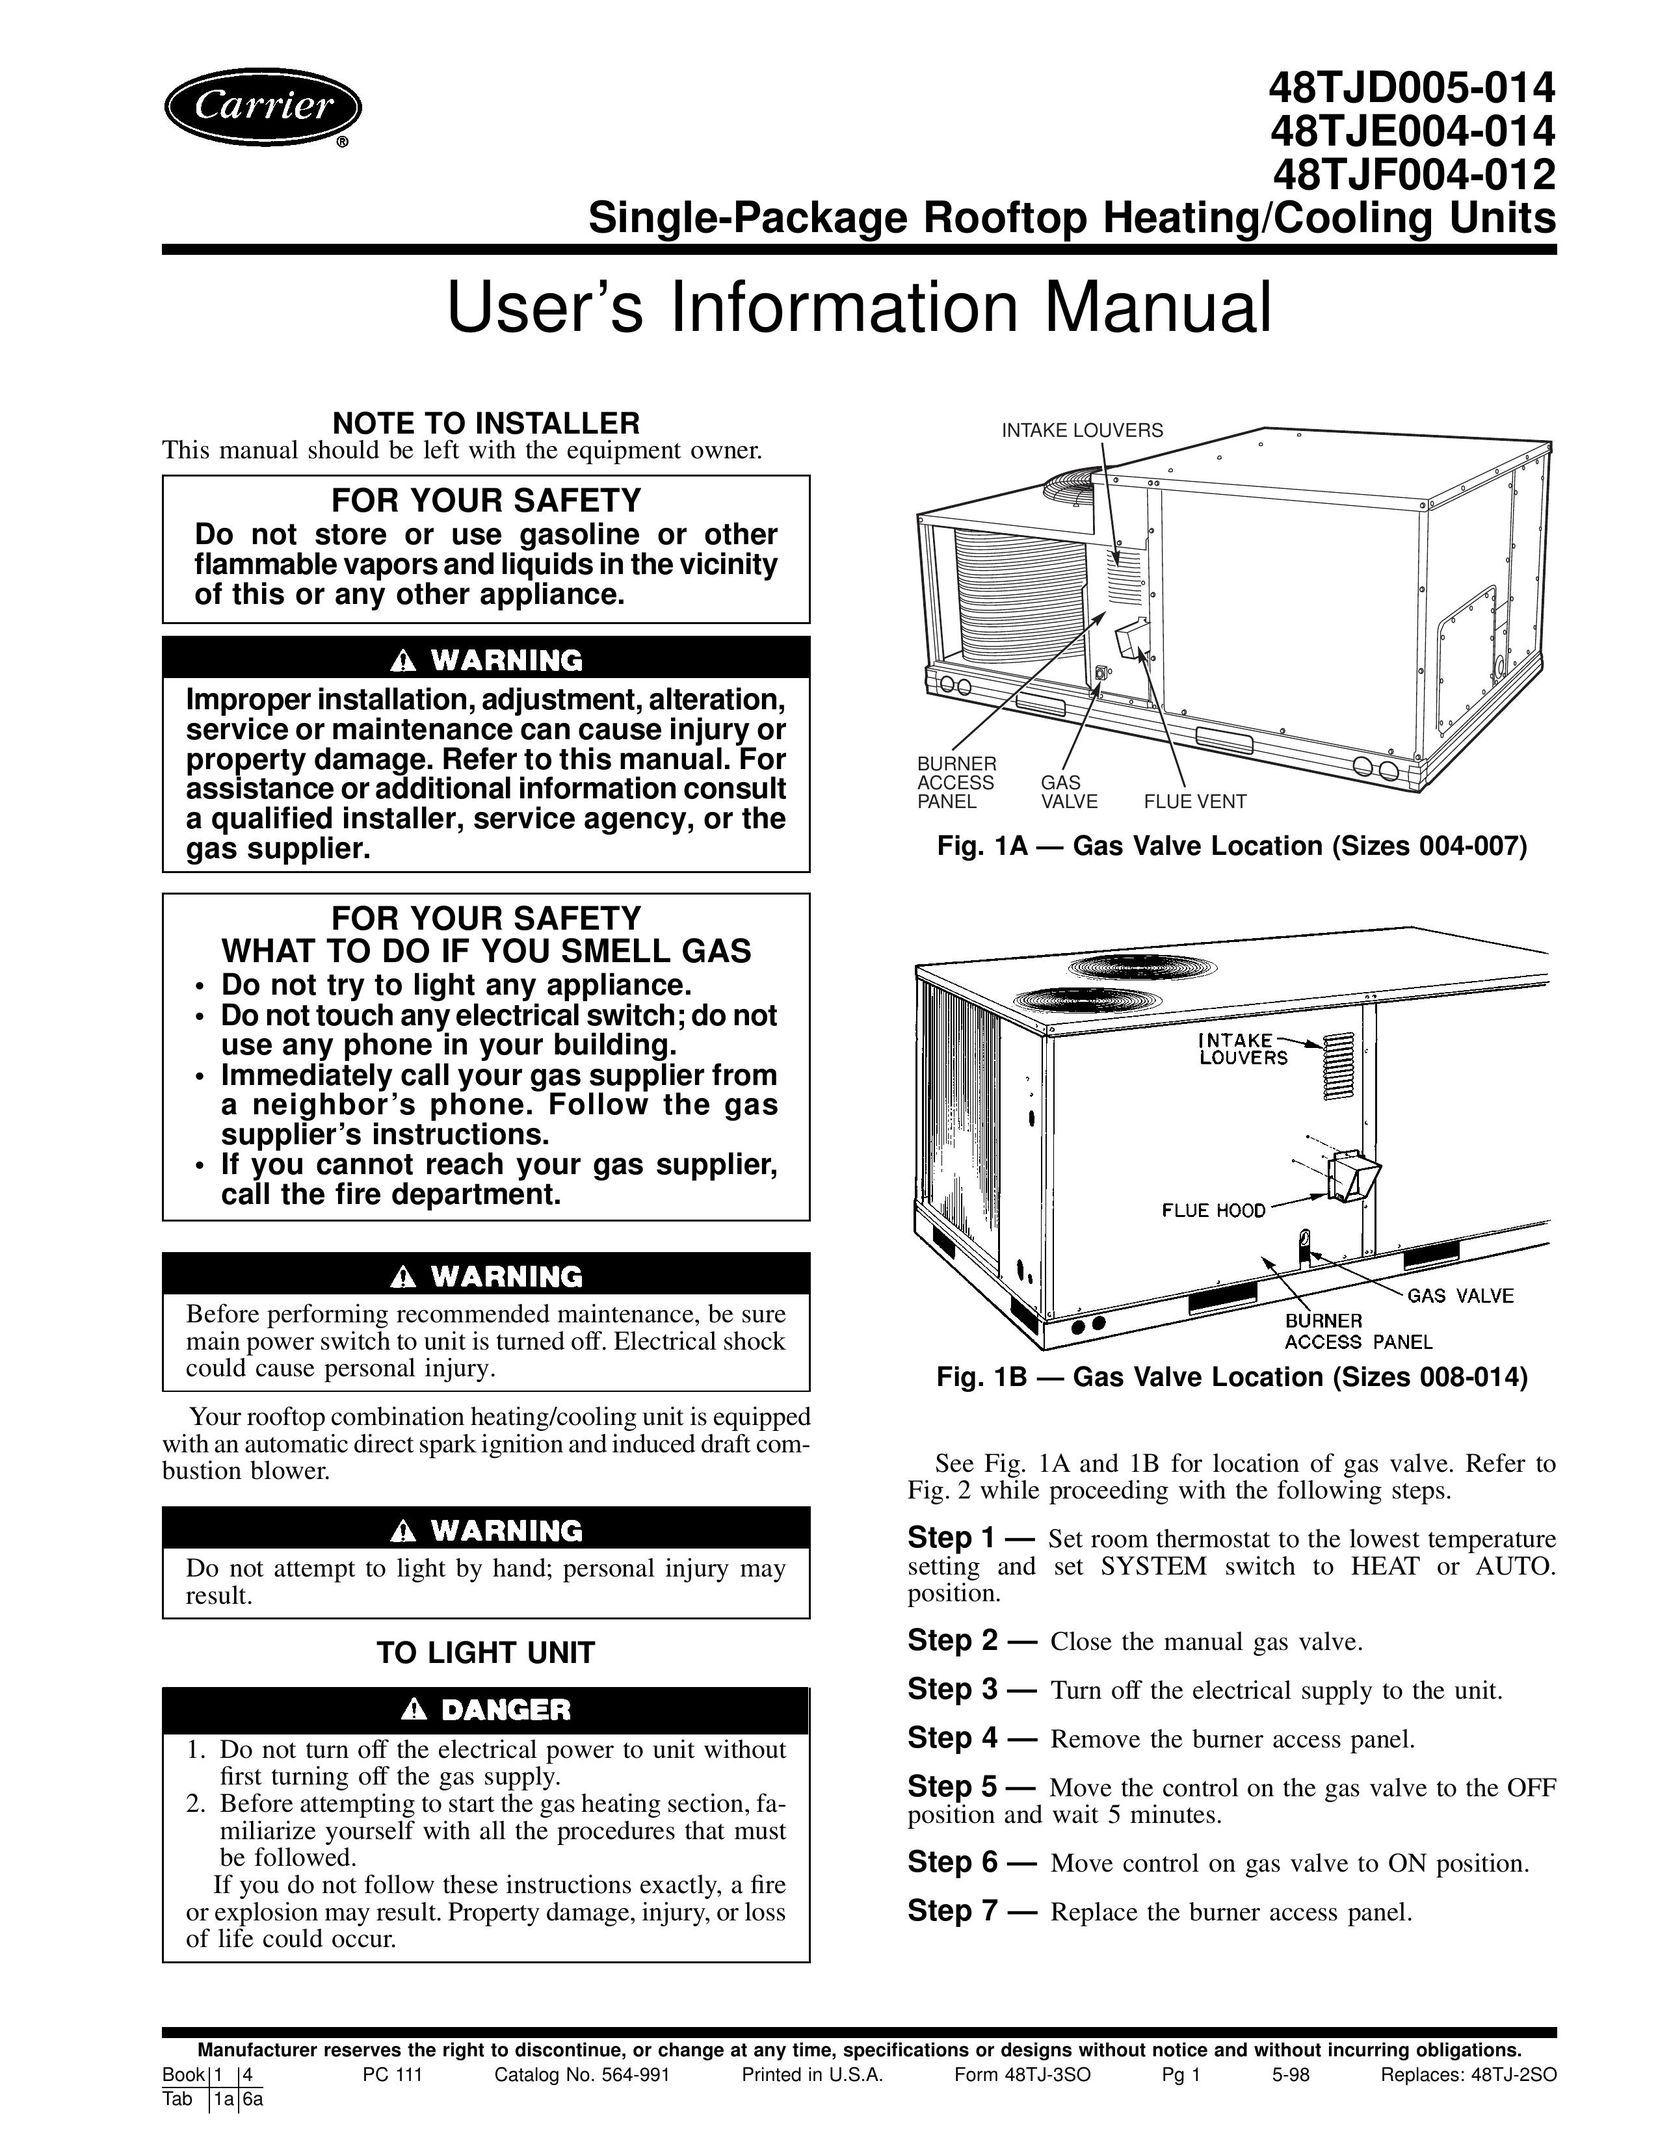 Carrier 48TJD005-014 Heating System User Manual